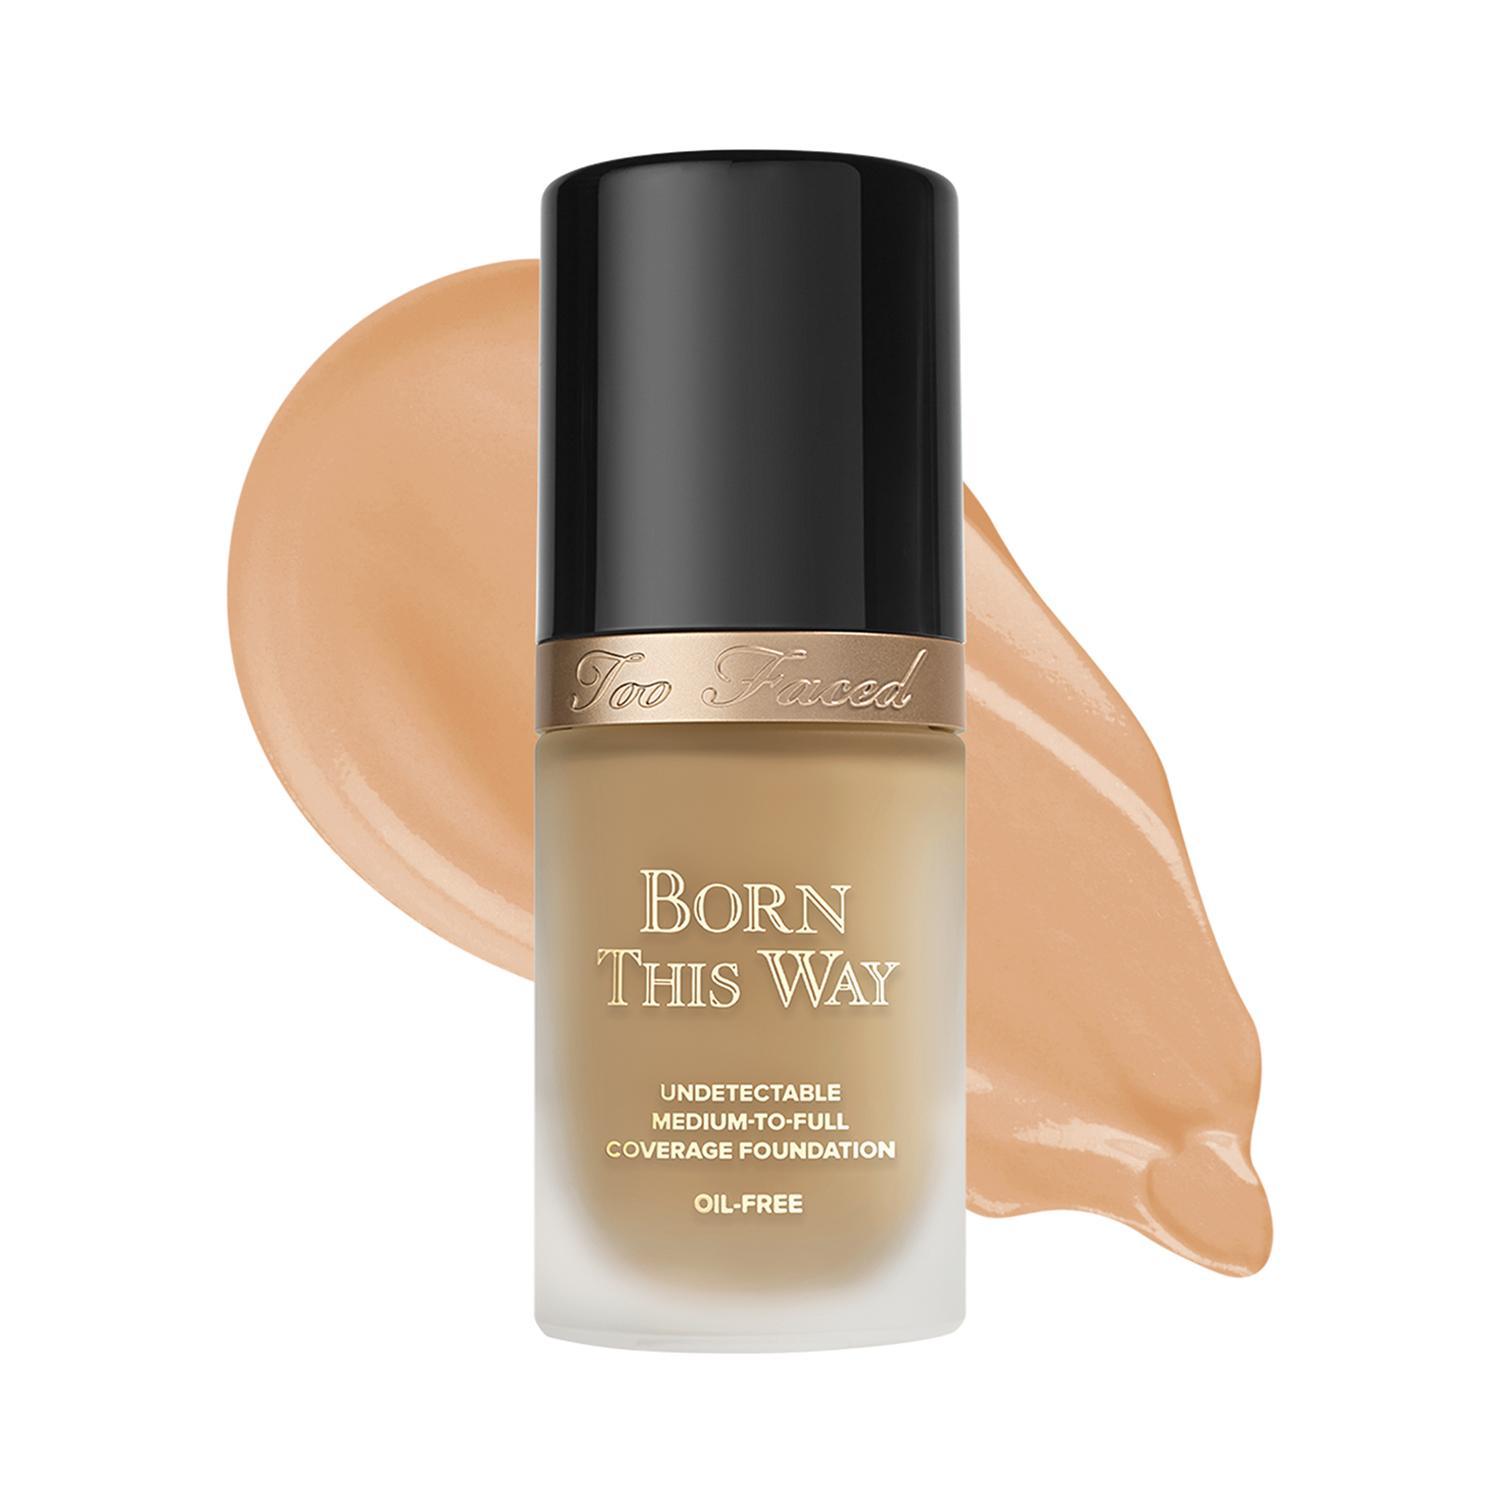 too faced born this way foundation - light beige (30ml)